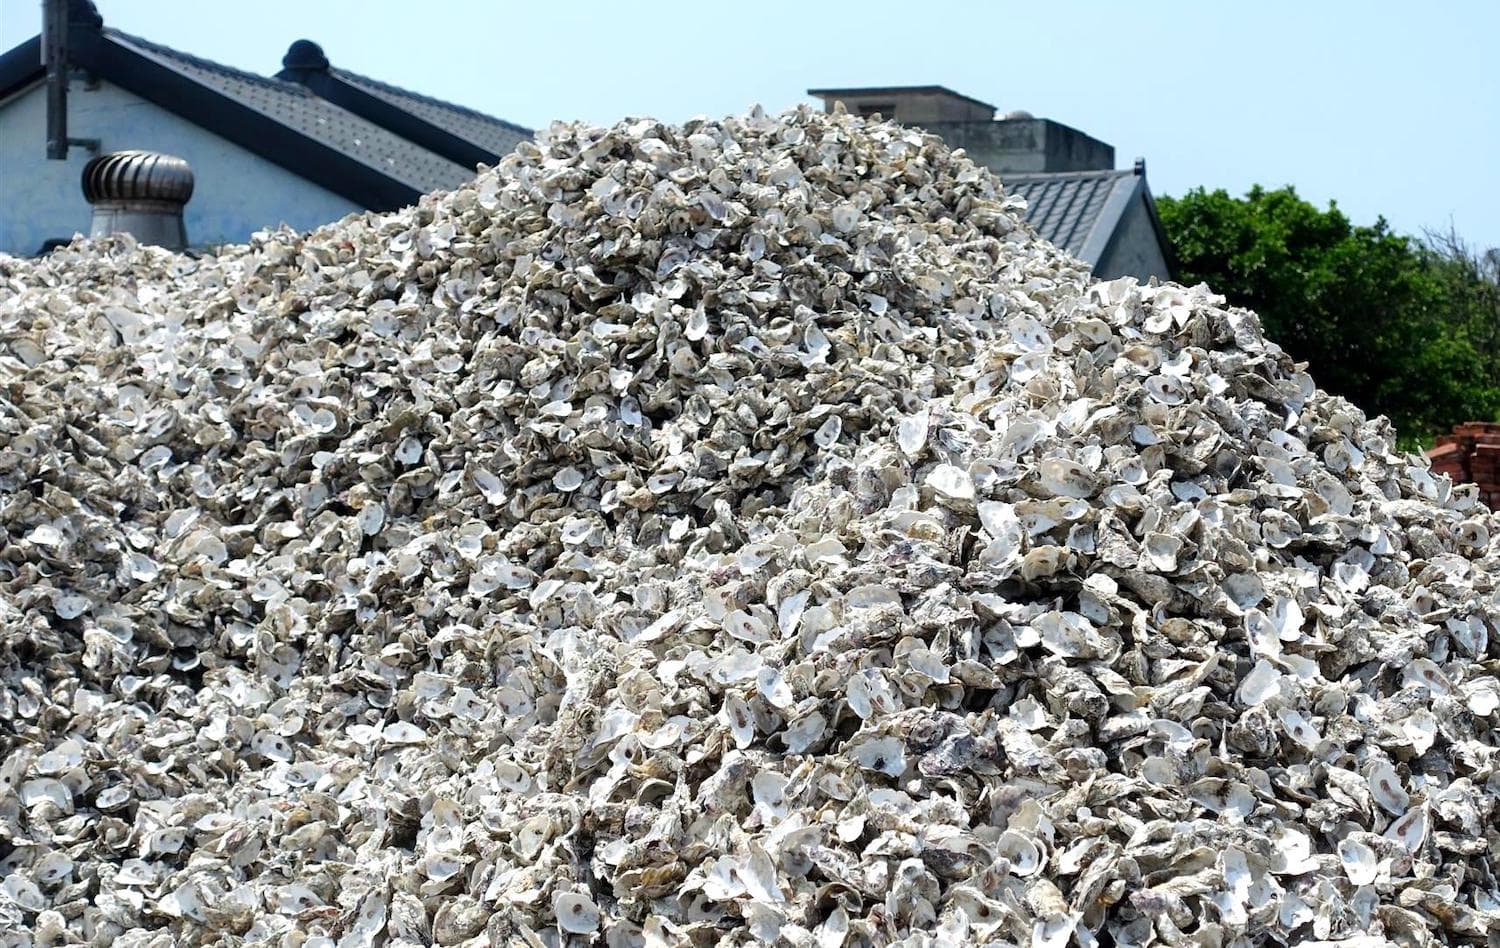 MESH FROM OYSTER-SHELLS